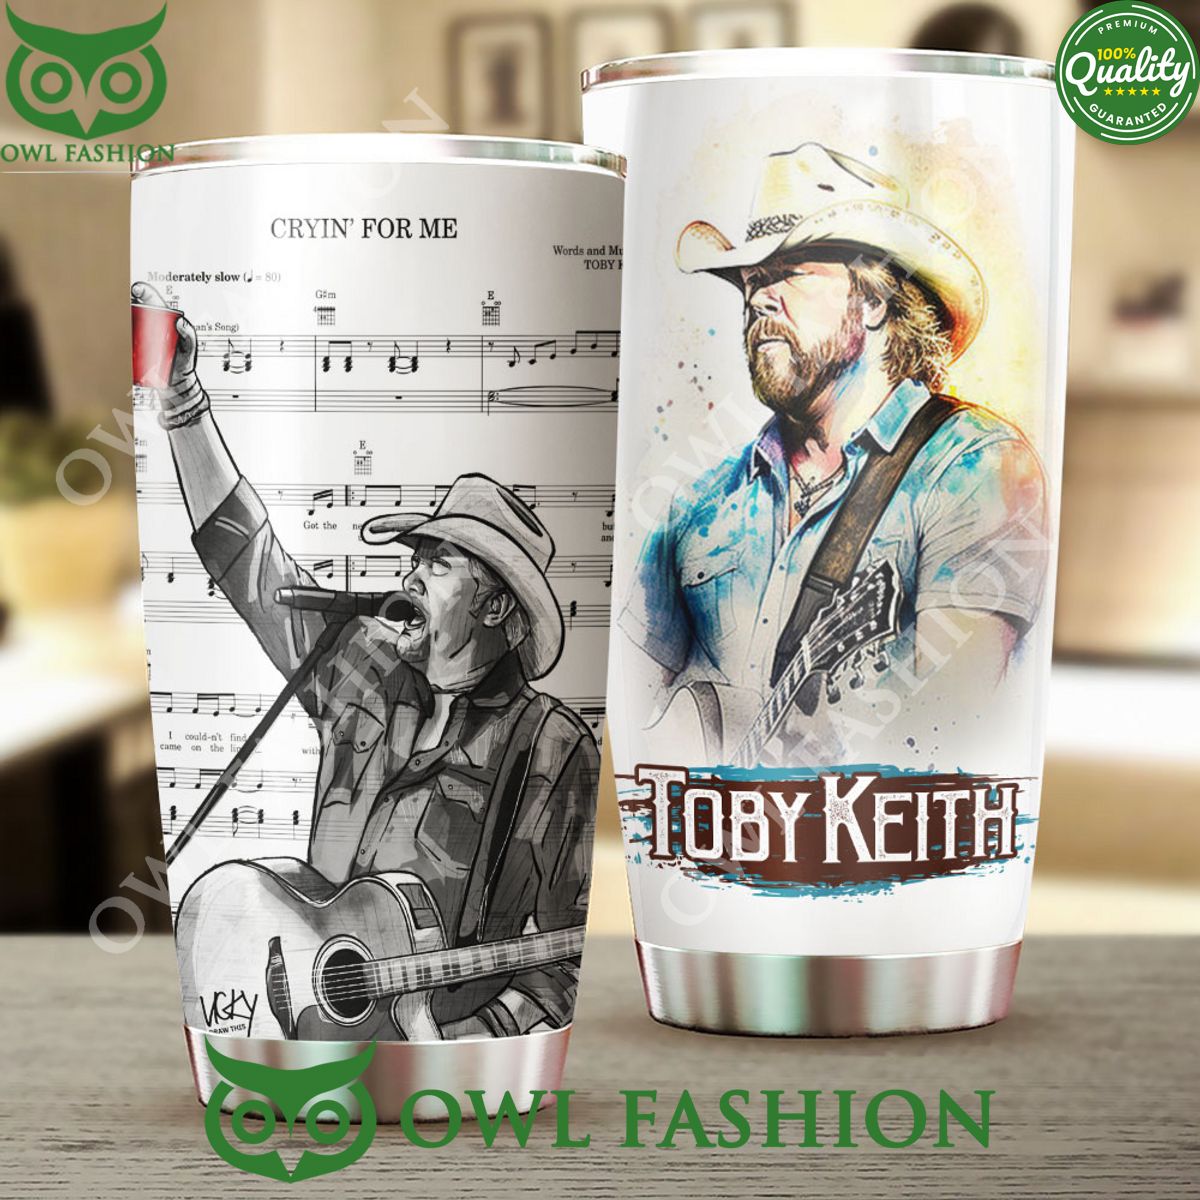 Toby Keith Crying For Me Limited Tumbler Cup She has grown up know